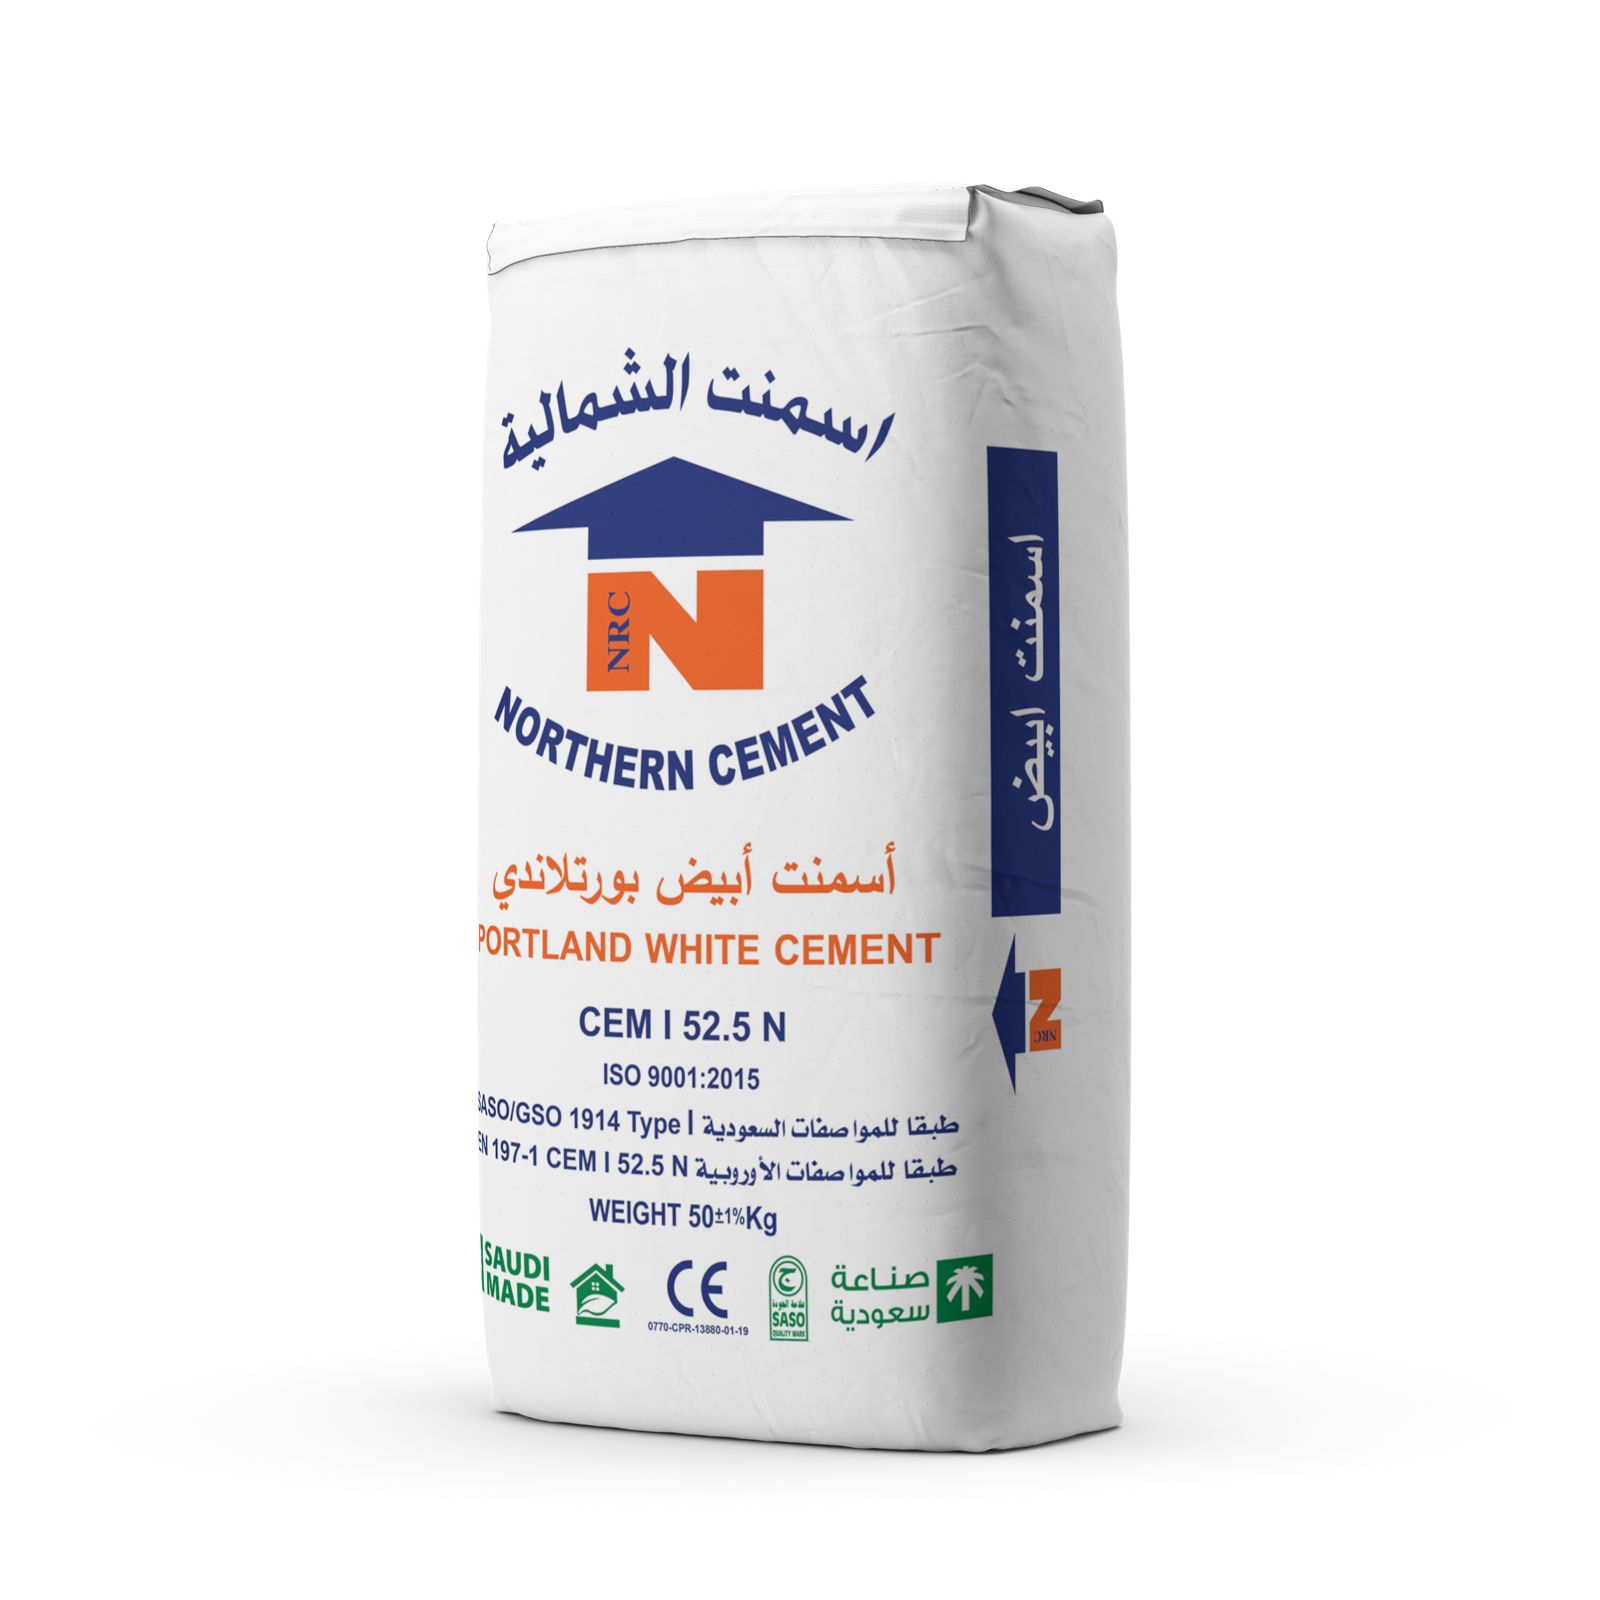 Northern Cement-White Cement Bag